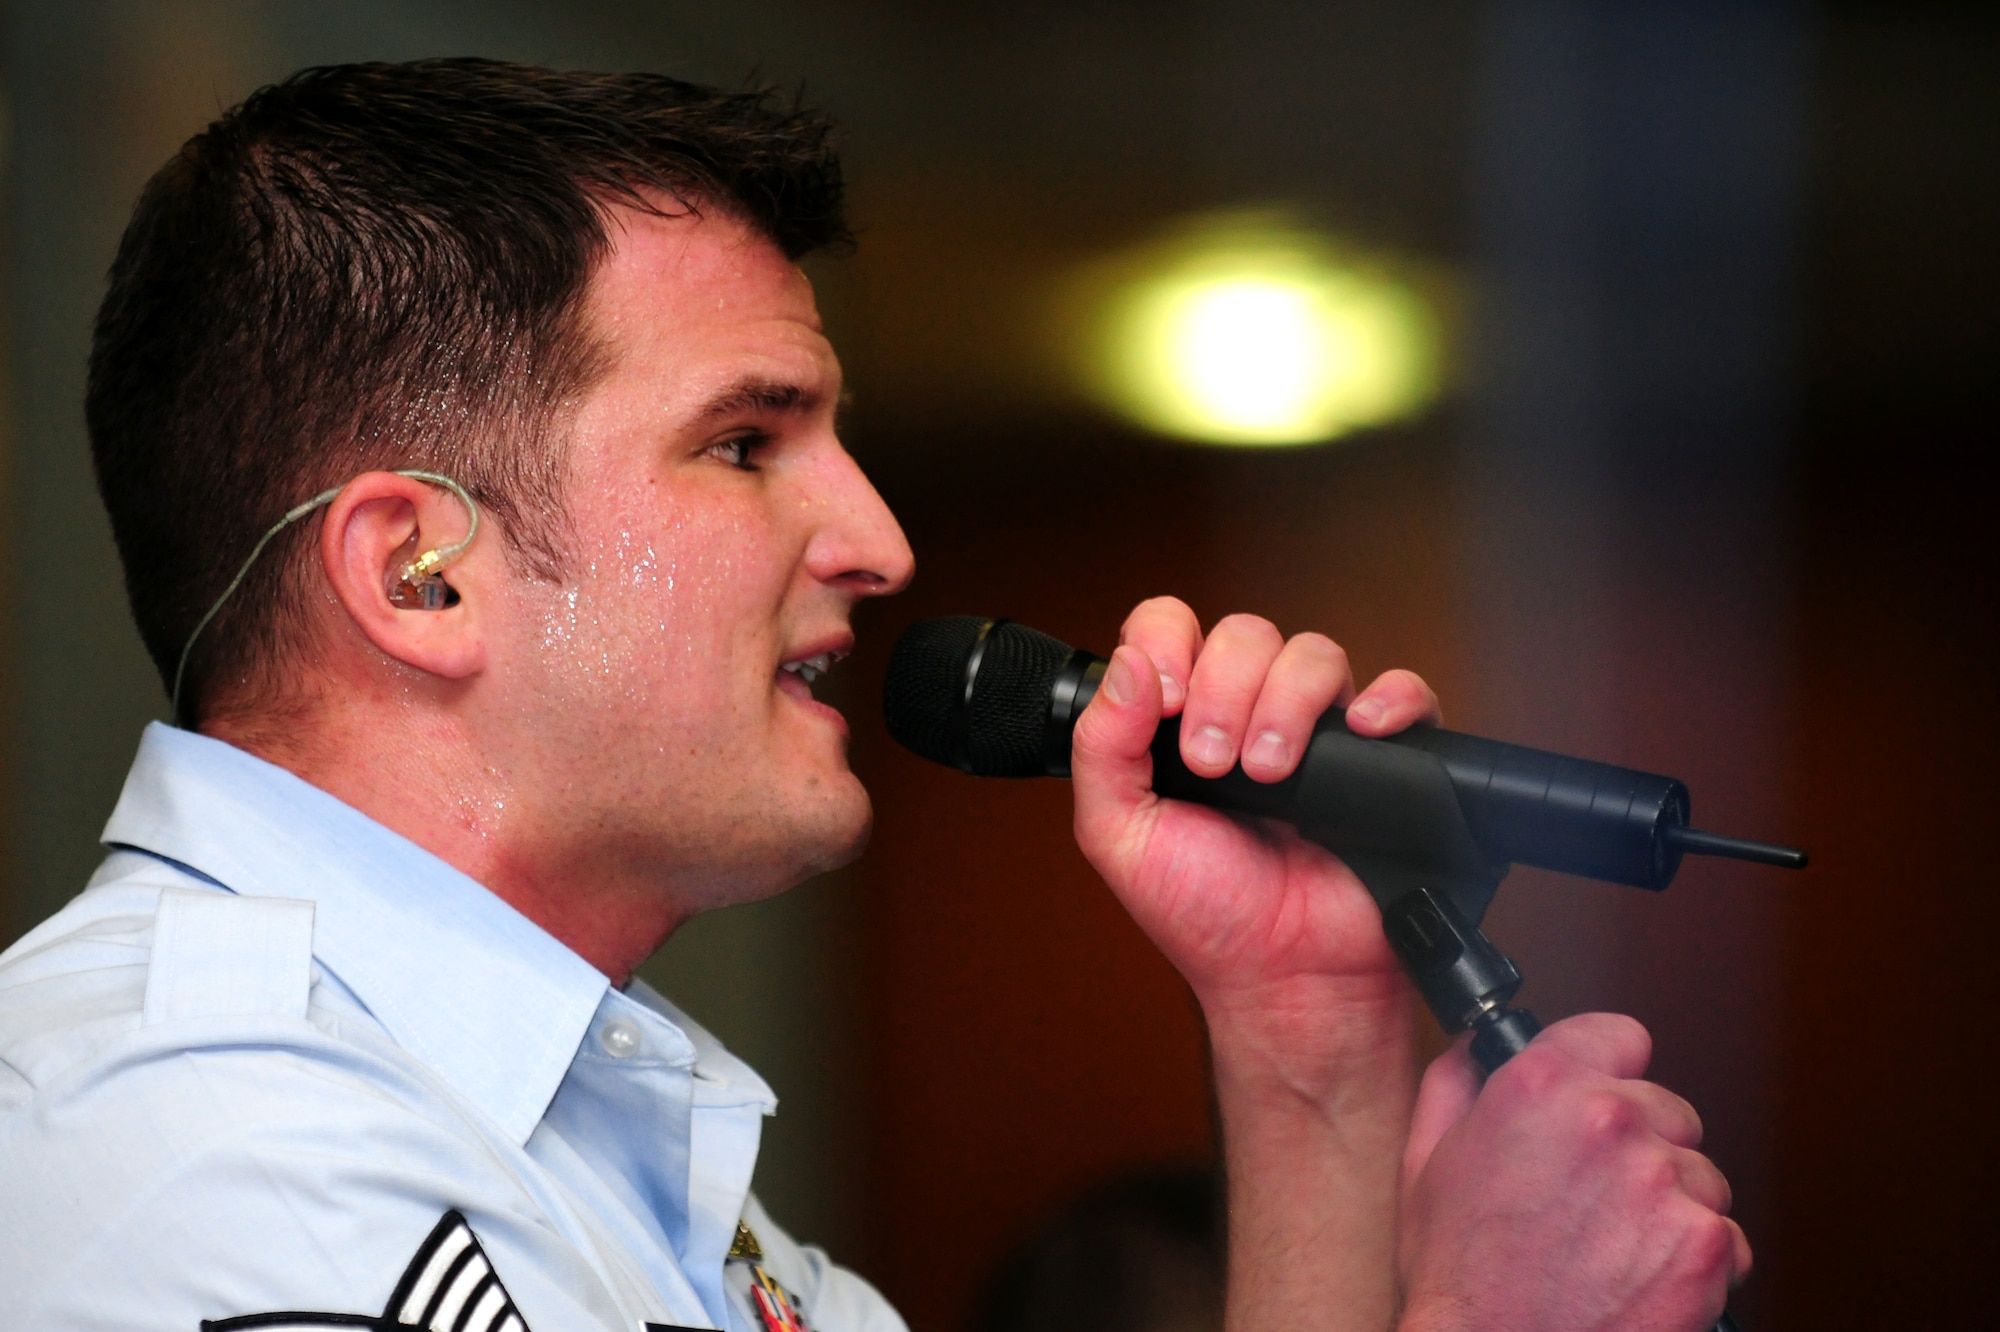 SPANGDAHLEM AIR BASE, Germany – Staff Sgt. Craig Bowman, U.S. Air Forces in Europe Band vocalist, sings during a performance at Club Eifel during Spangdahlem’s Diversity Day 2011 Aug. 25. Diversity Day showcased numerous attractions and booths that displayed cultural and ethnic diversity among Air Force service members and their families. (U.S. Air Force photo/Airman 1st Class Matthew B. Fredericks)